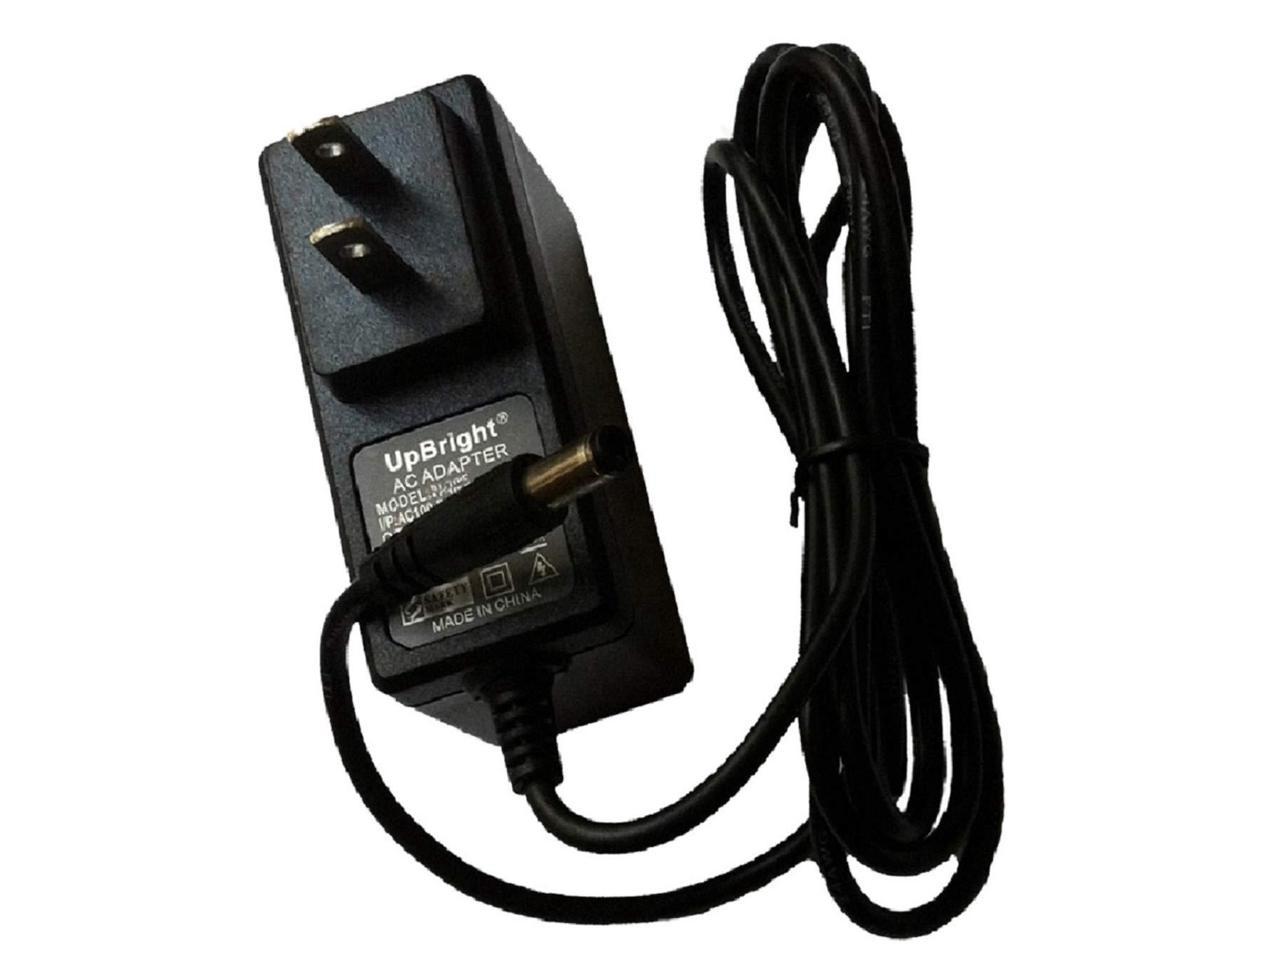 OTC SPX Genisys EVO AC/DC Battery Charger Adapter replaces Mac Mentor ET3421-04 